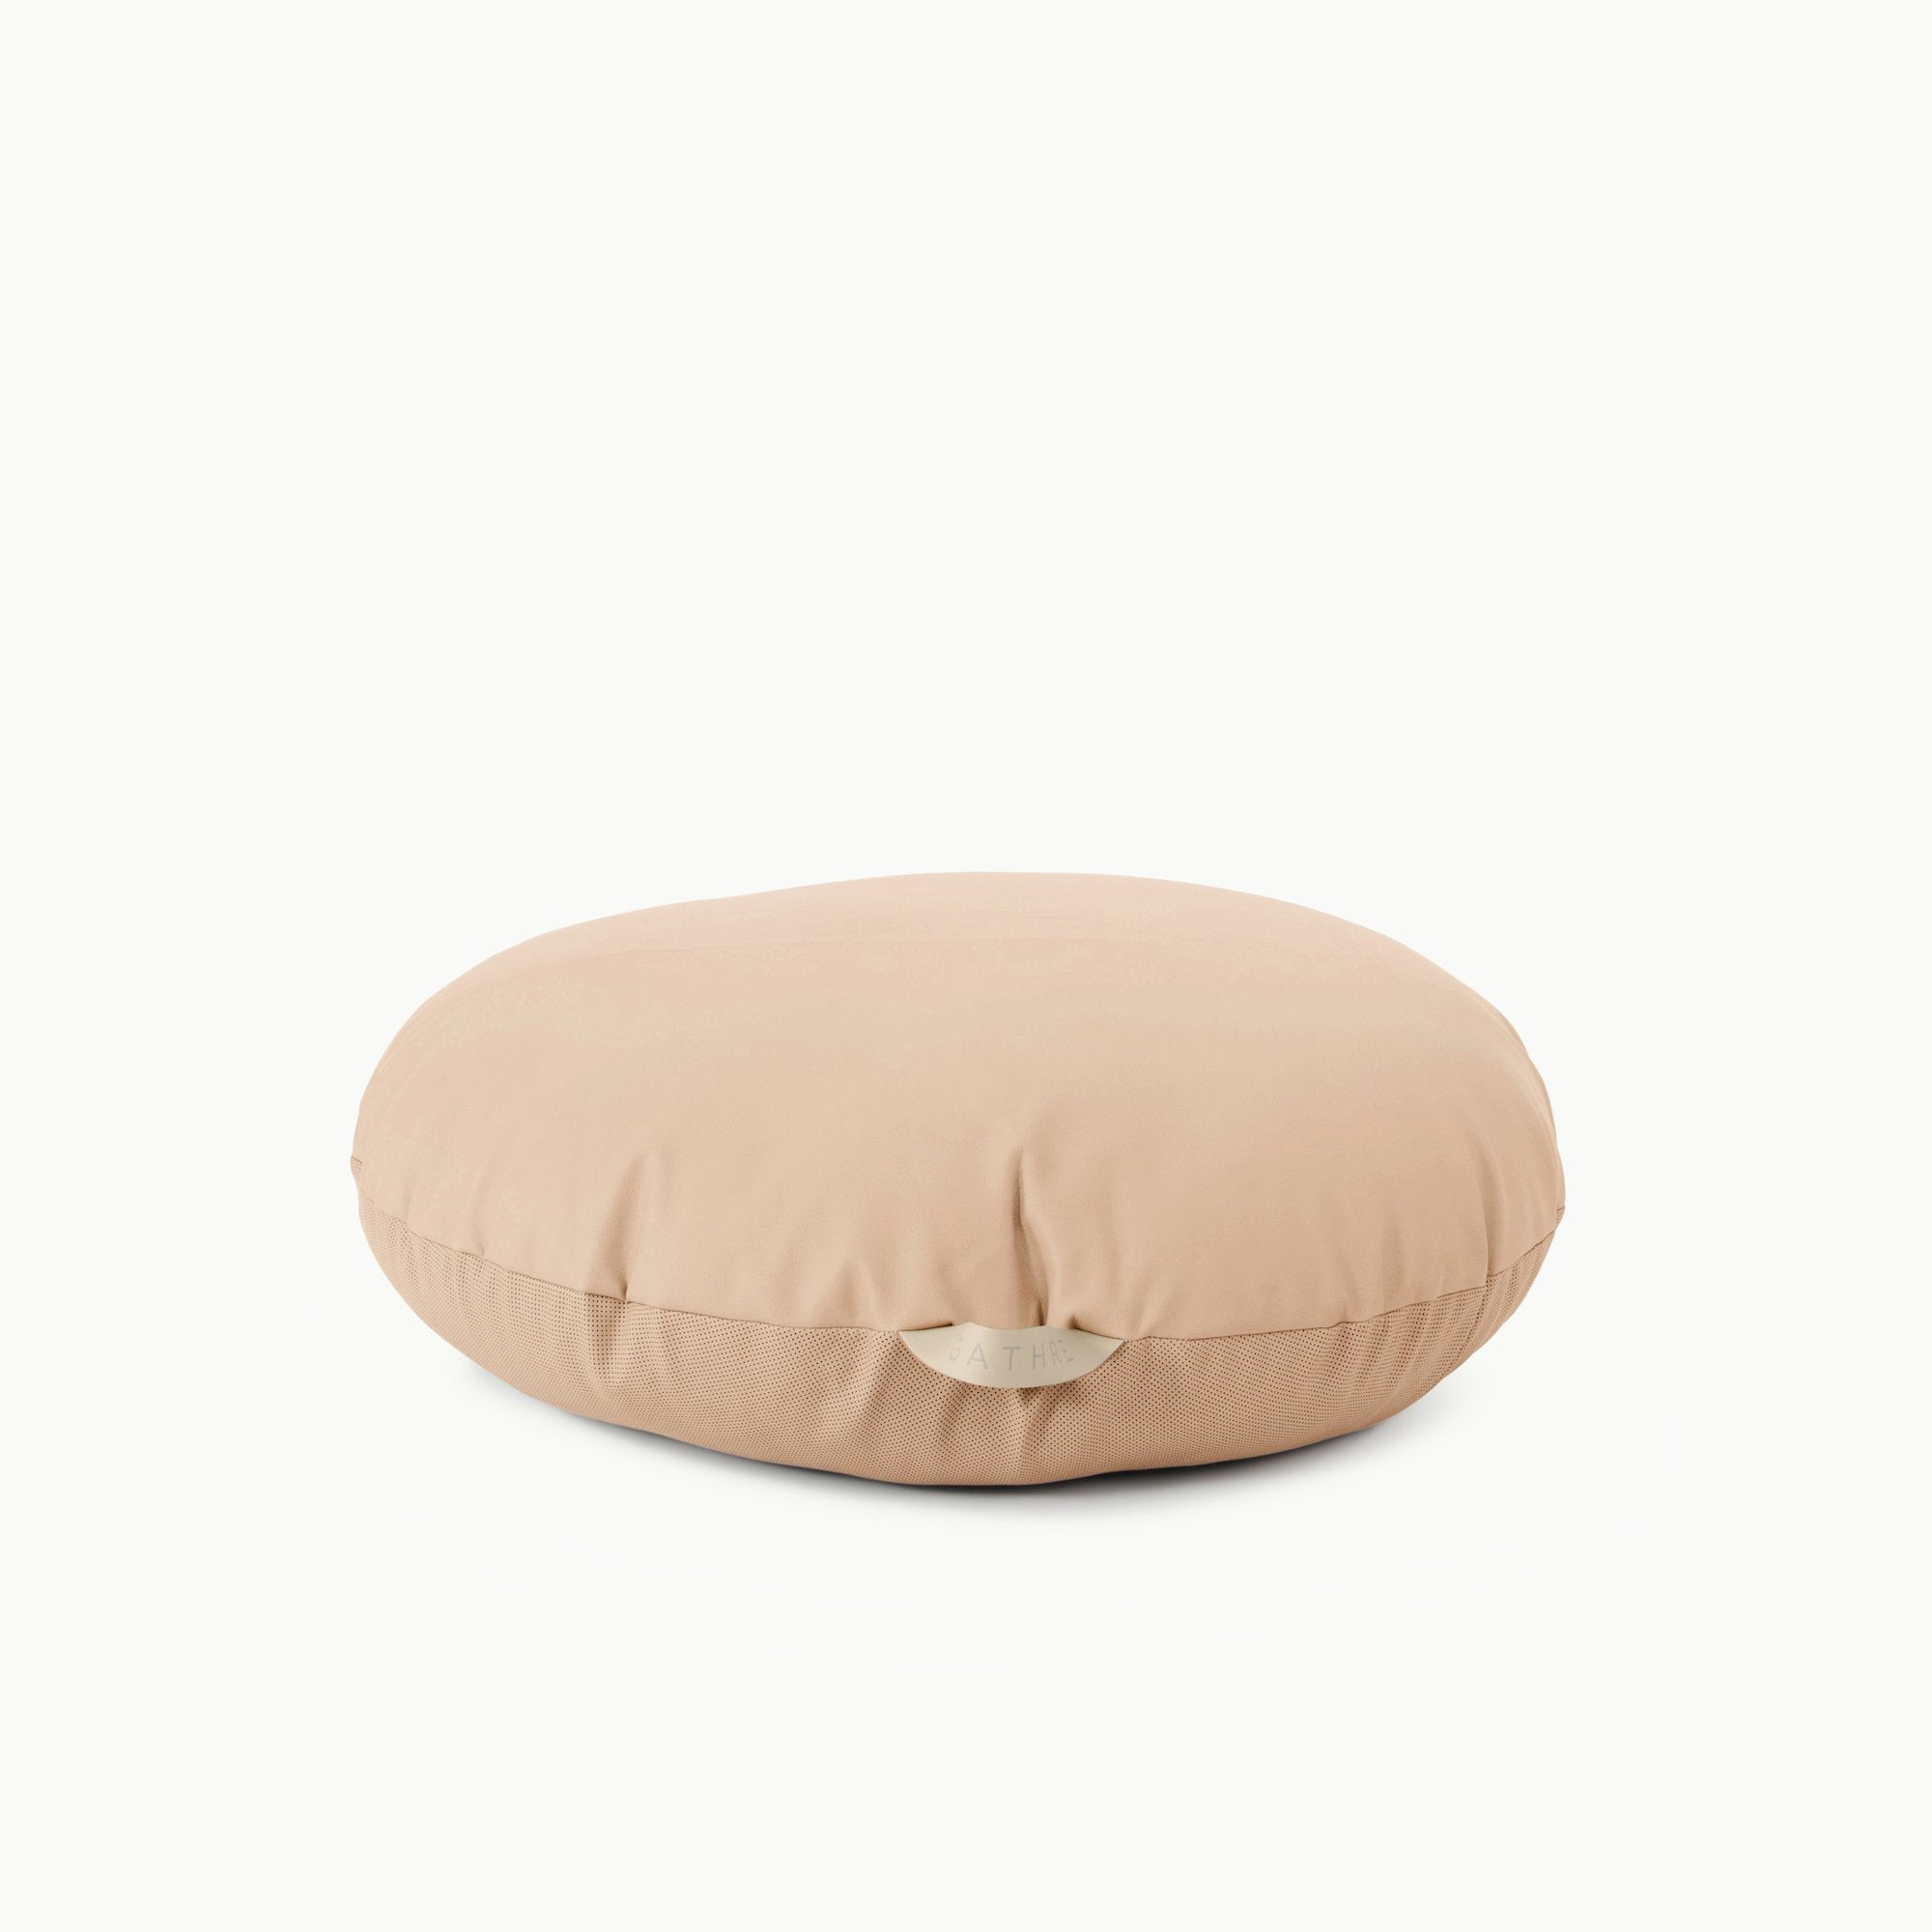 Untanned  (on sale) / Circle@Gathre deboss detail on the Untanned Circle Floor Cushion